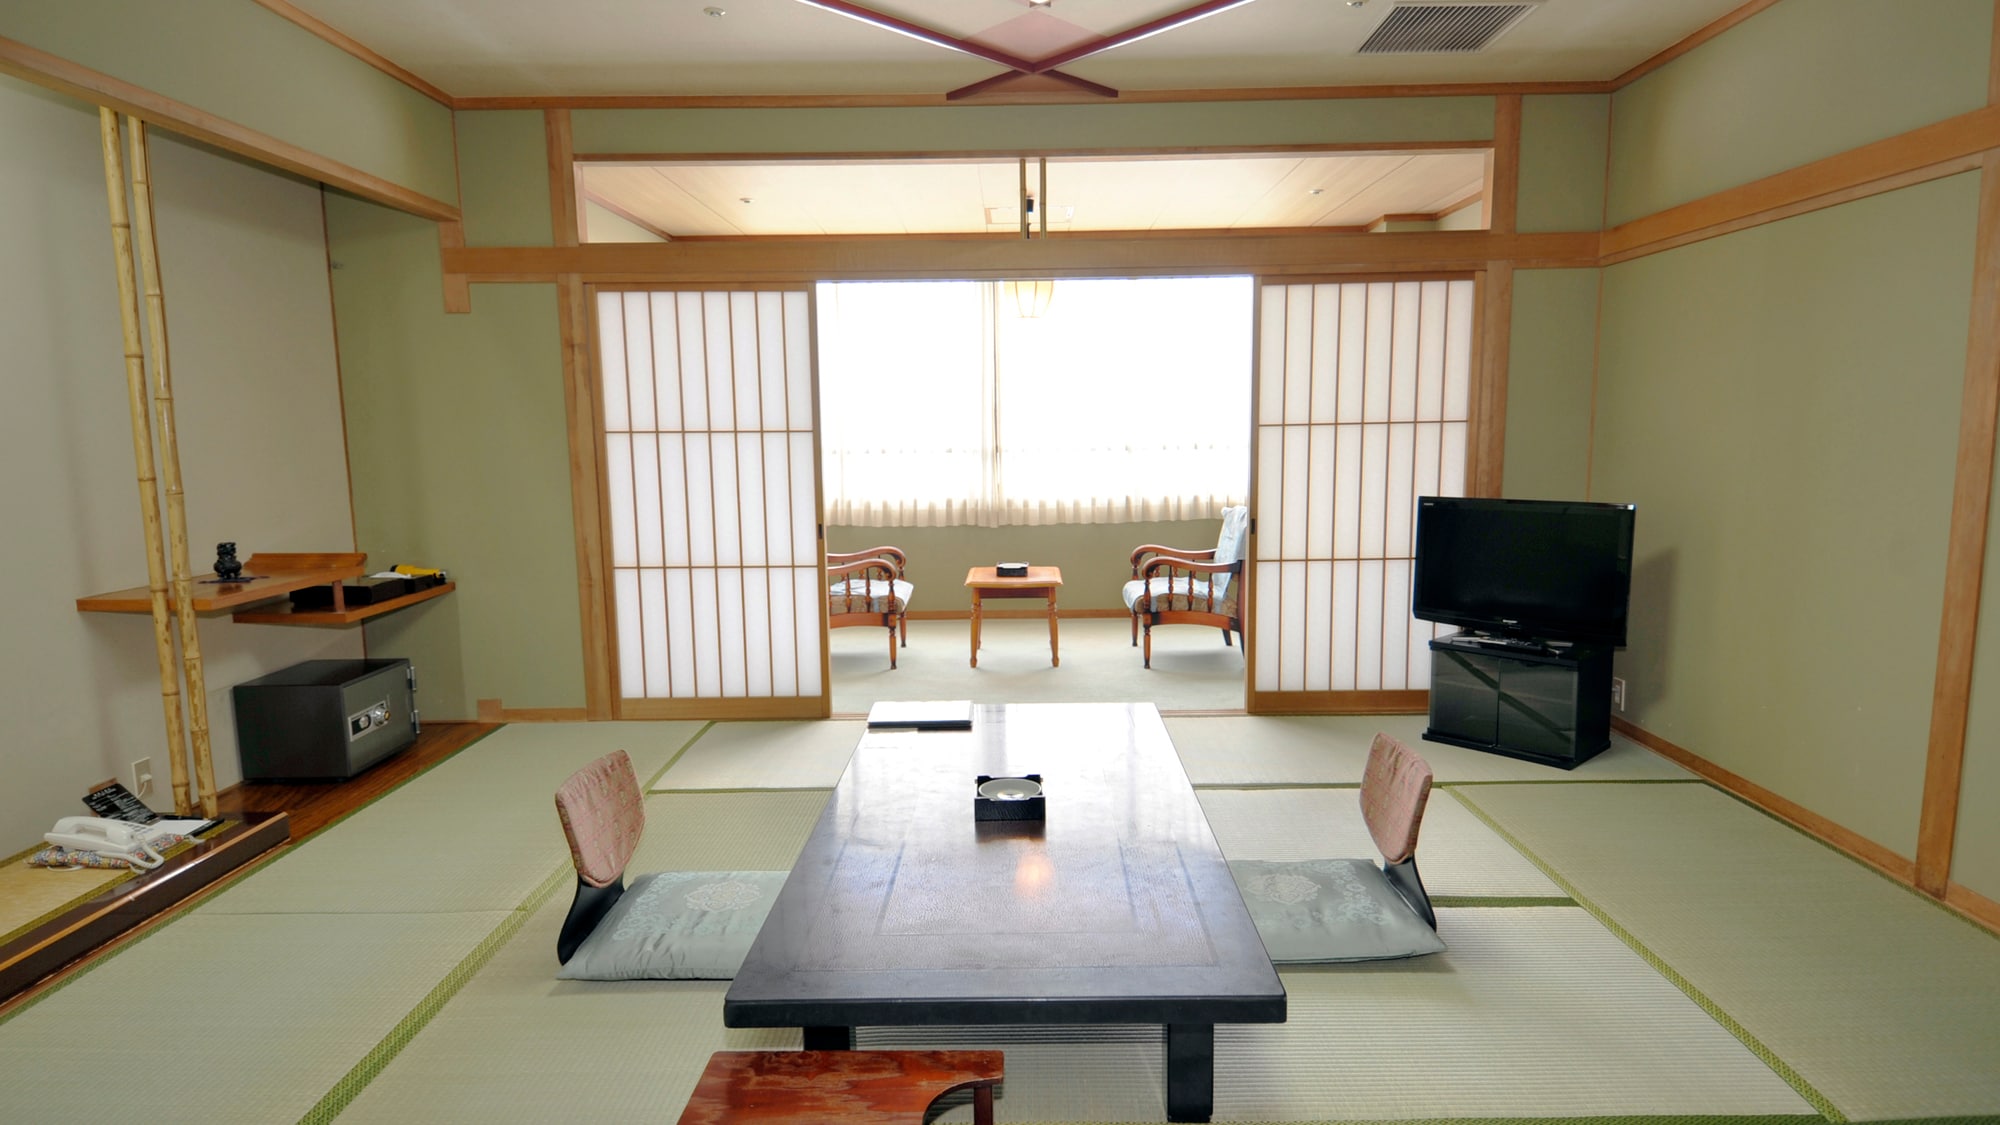 ● 10 tatami mats + 6 tatami mats (63 square meters or more) for 2 Japanese-style rooms